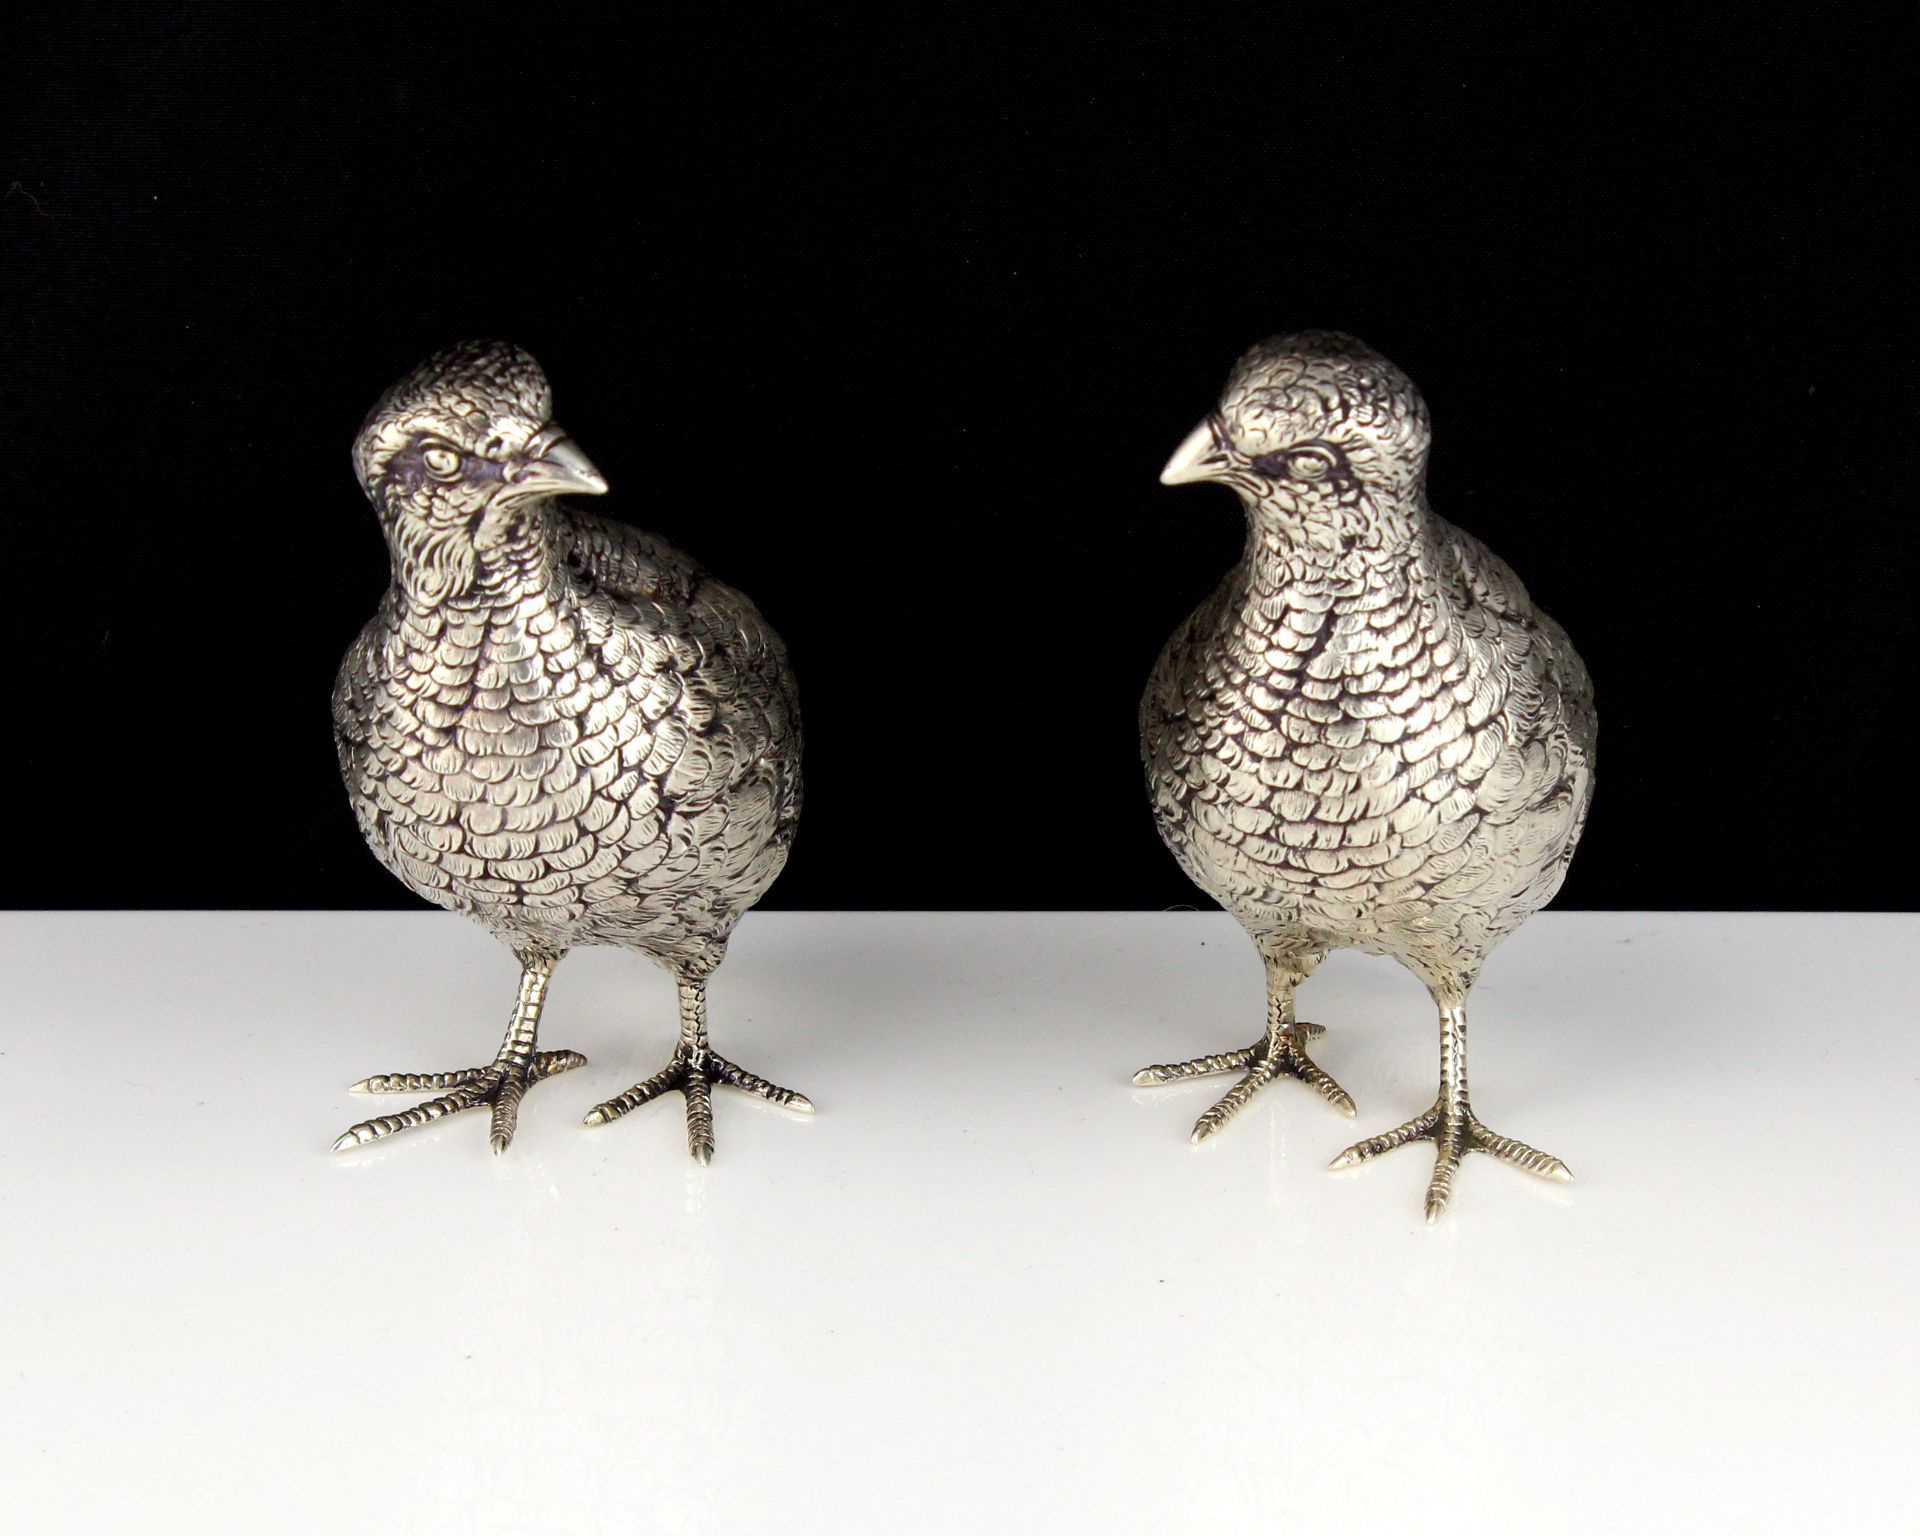 A pair of antique German Sterling Silver statues of grouse circa 1890 each modeled as a standing